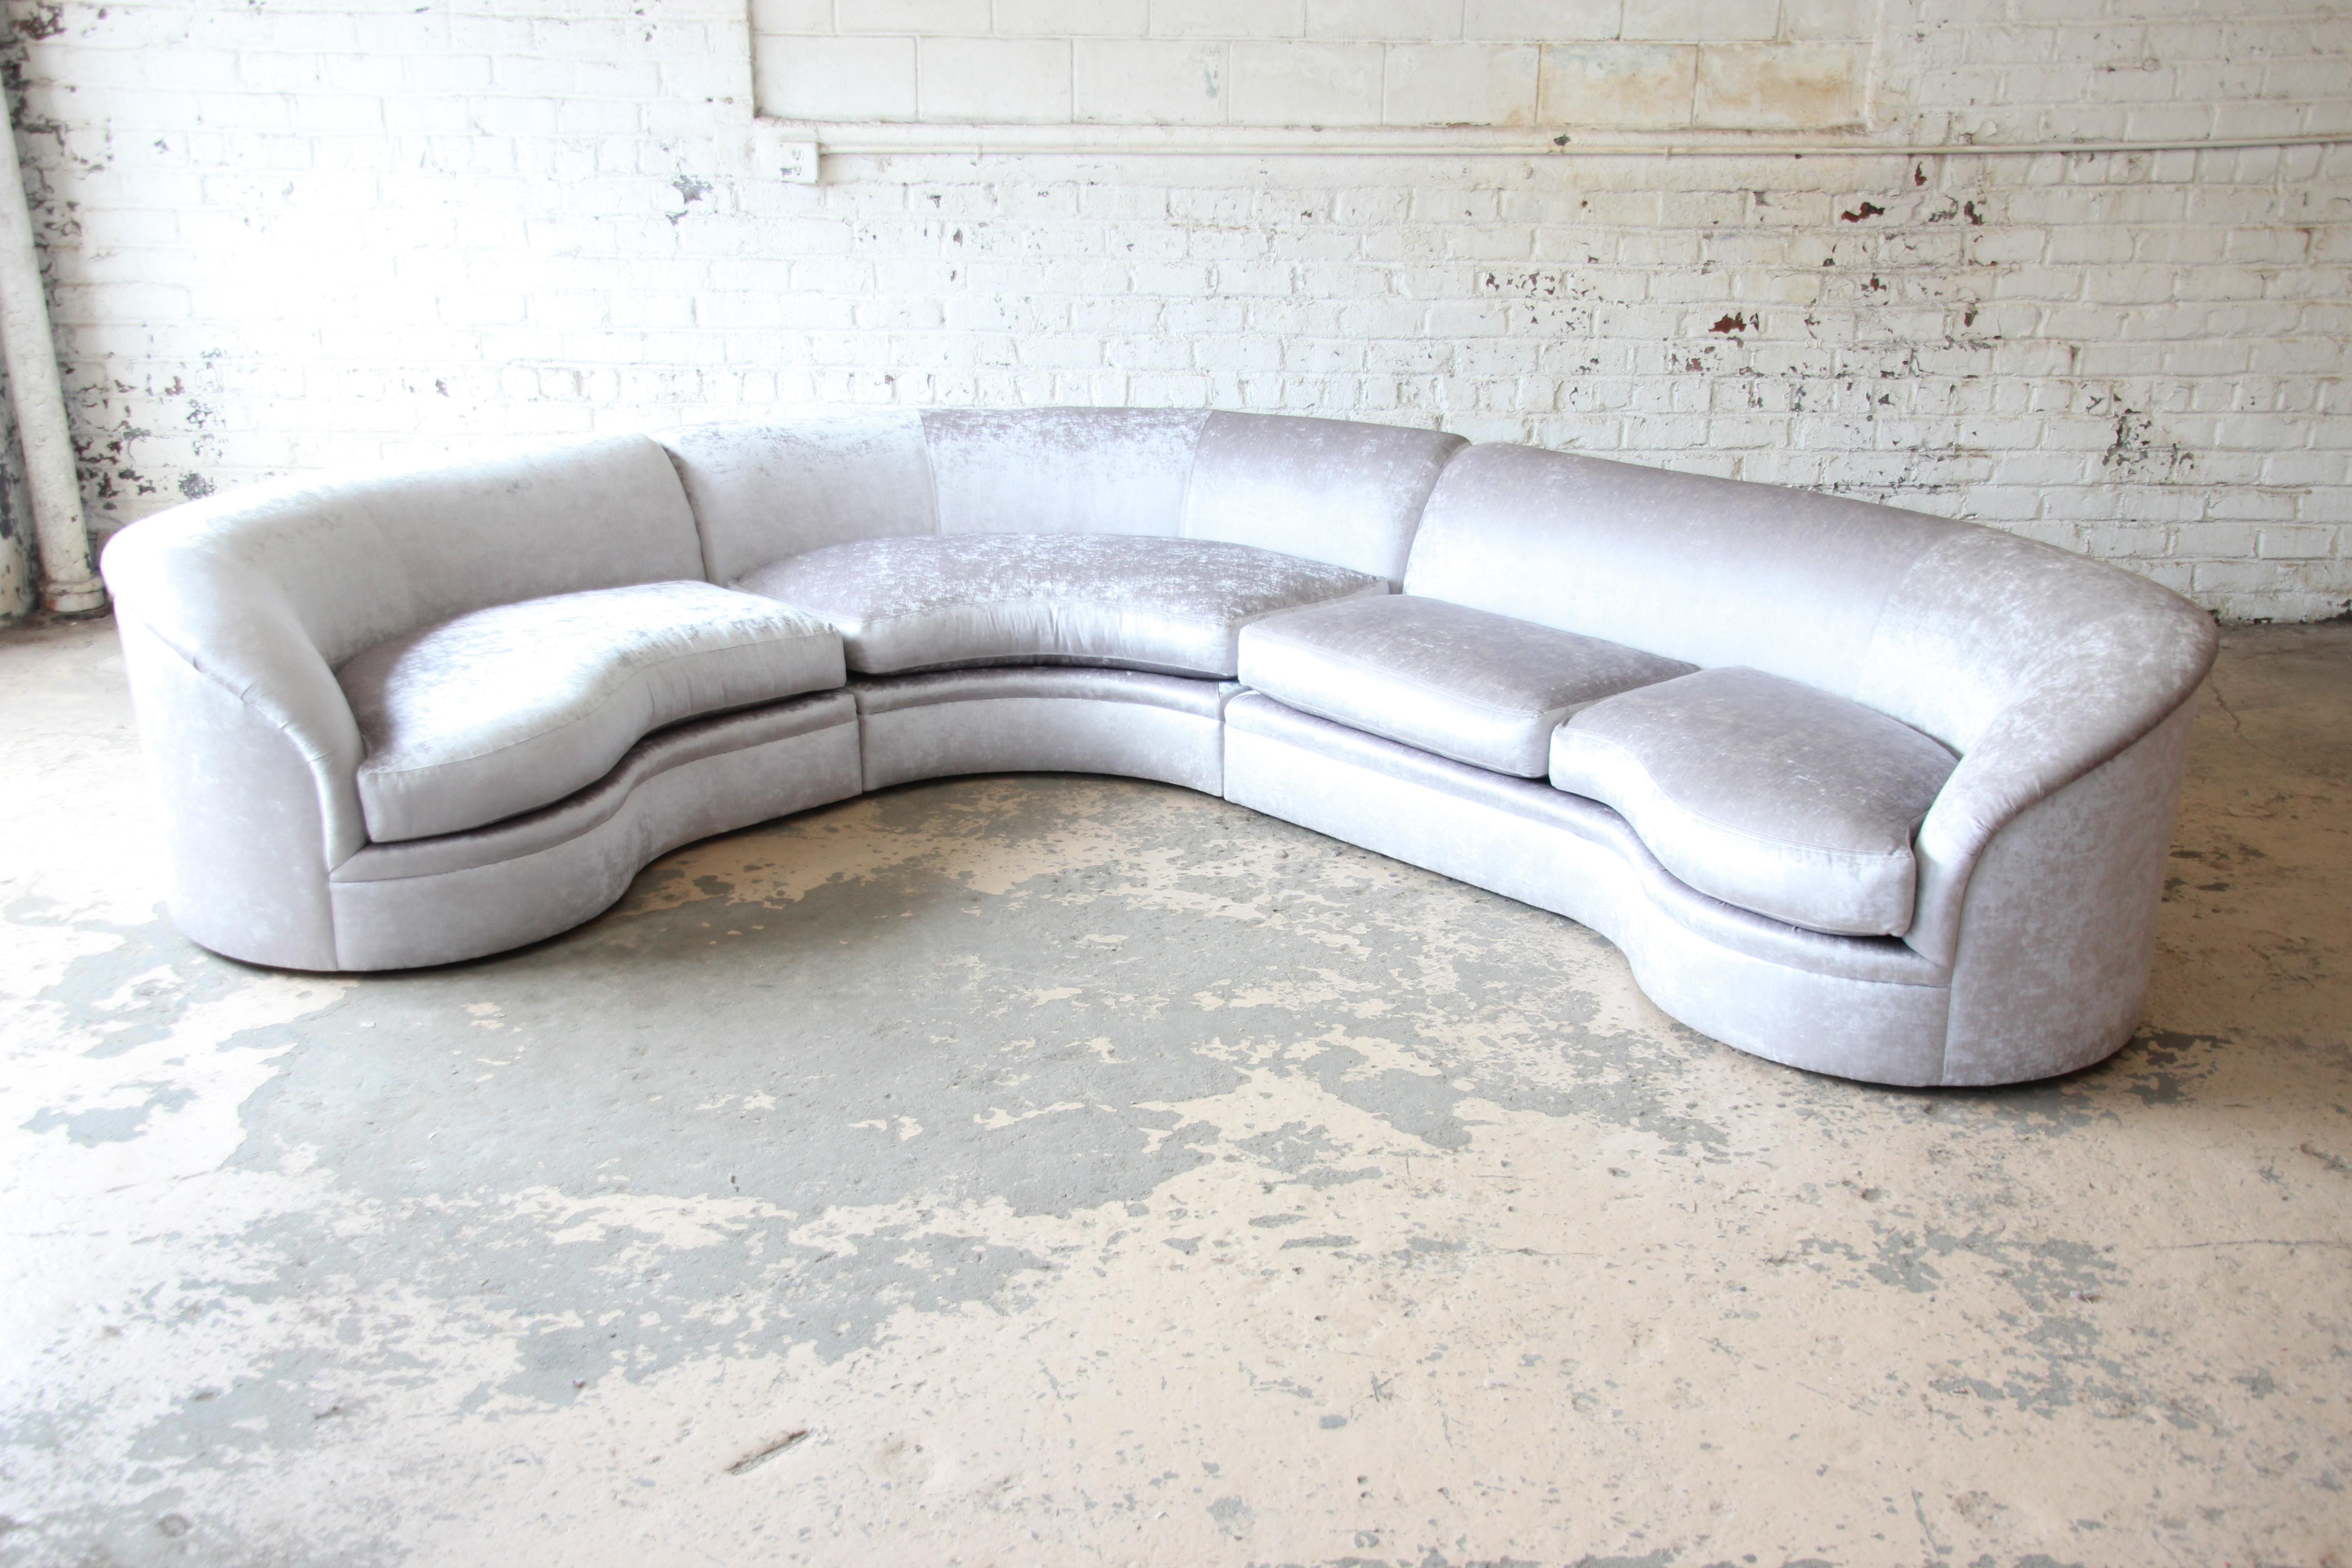 An outstanding three-piece curved sectional sofa by Directional. The sofa has been expertly restored by Comfort Upholstery of Chicago, newly reupholstered with a very high-end sleek silver gray velvet upholstery by Holly Hunt. This 1970s sectional